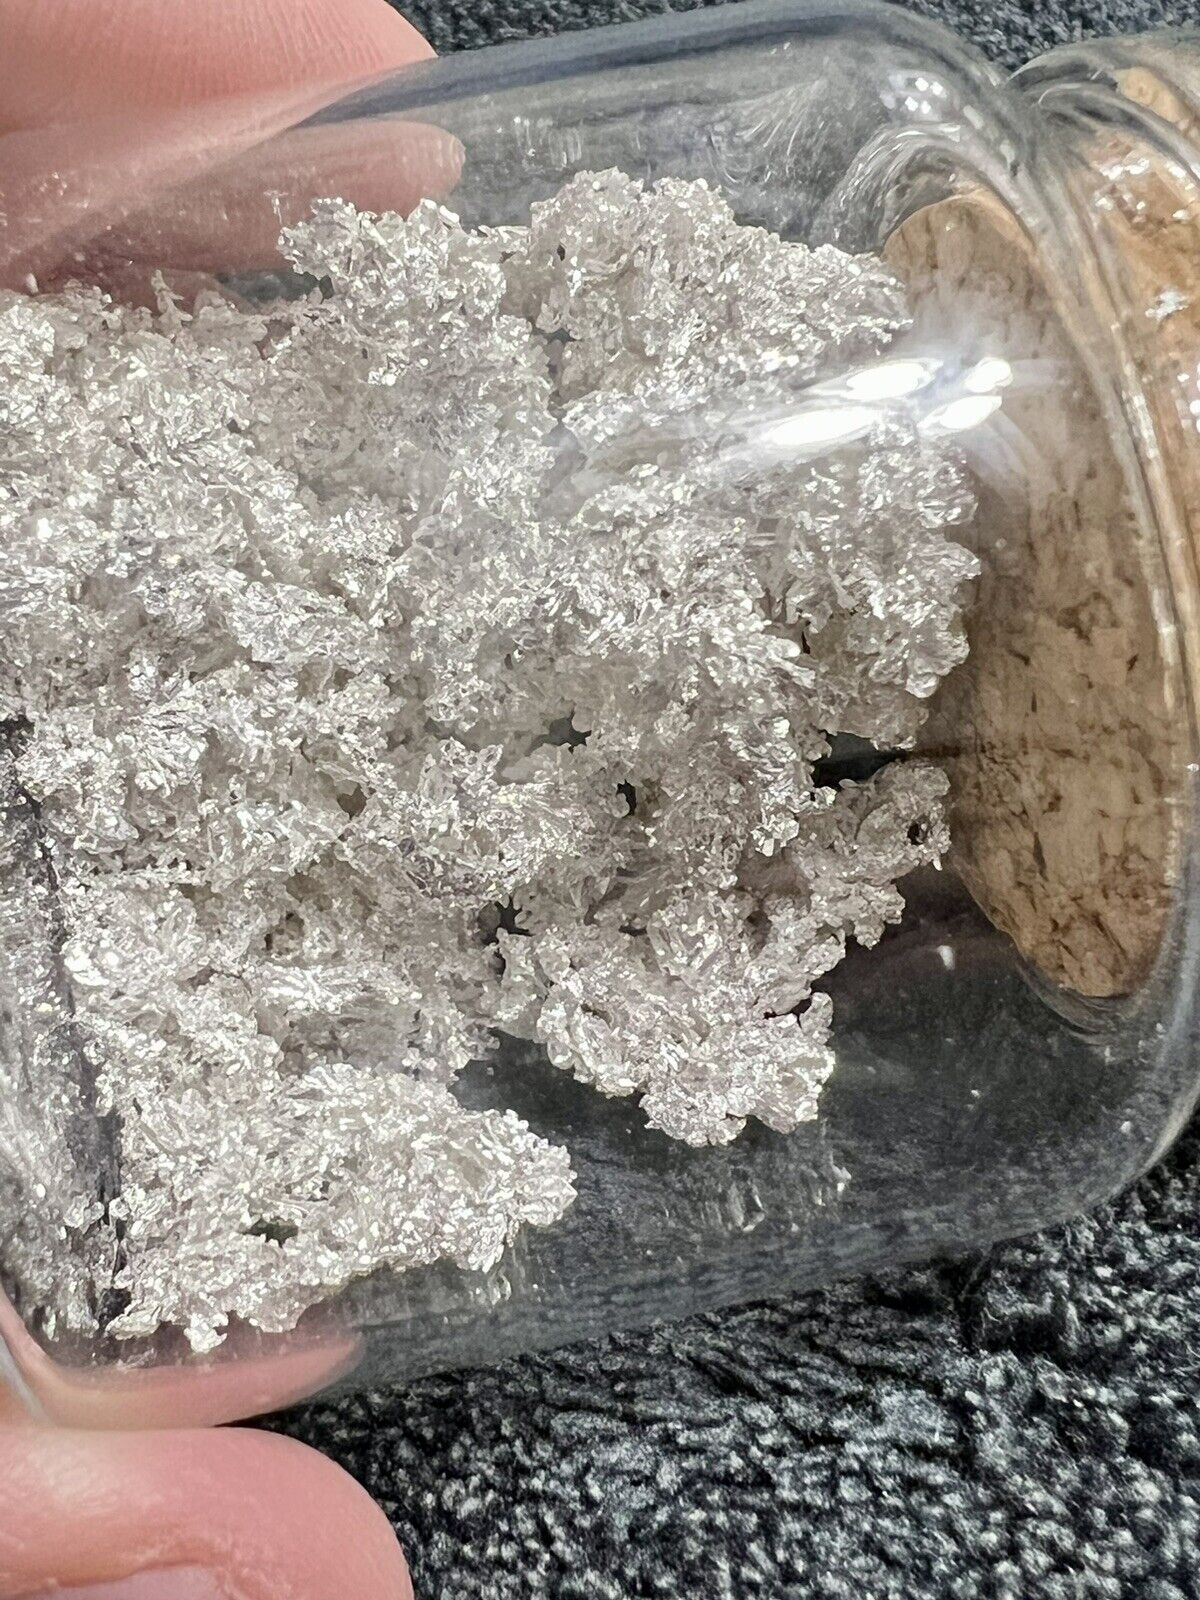 1 Troy Ounce ( 31.1 Grams ) of Crystalline Silver .999+ fine quality